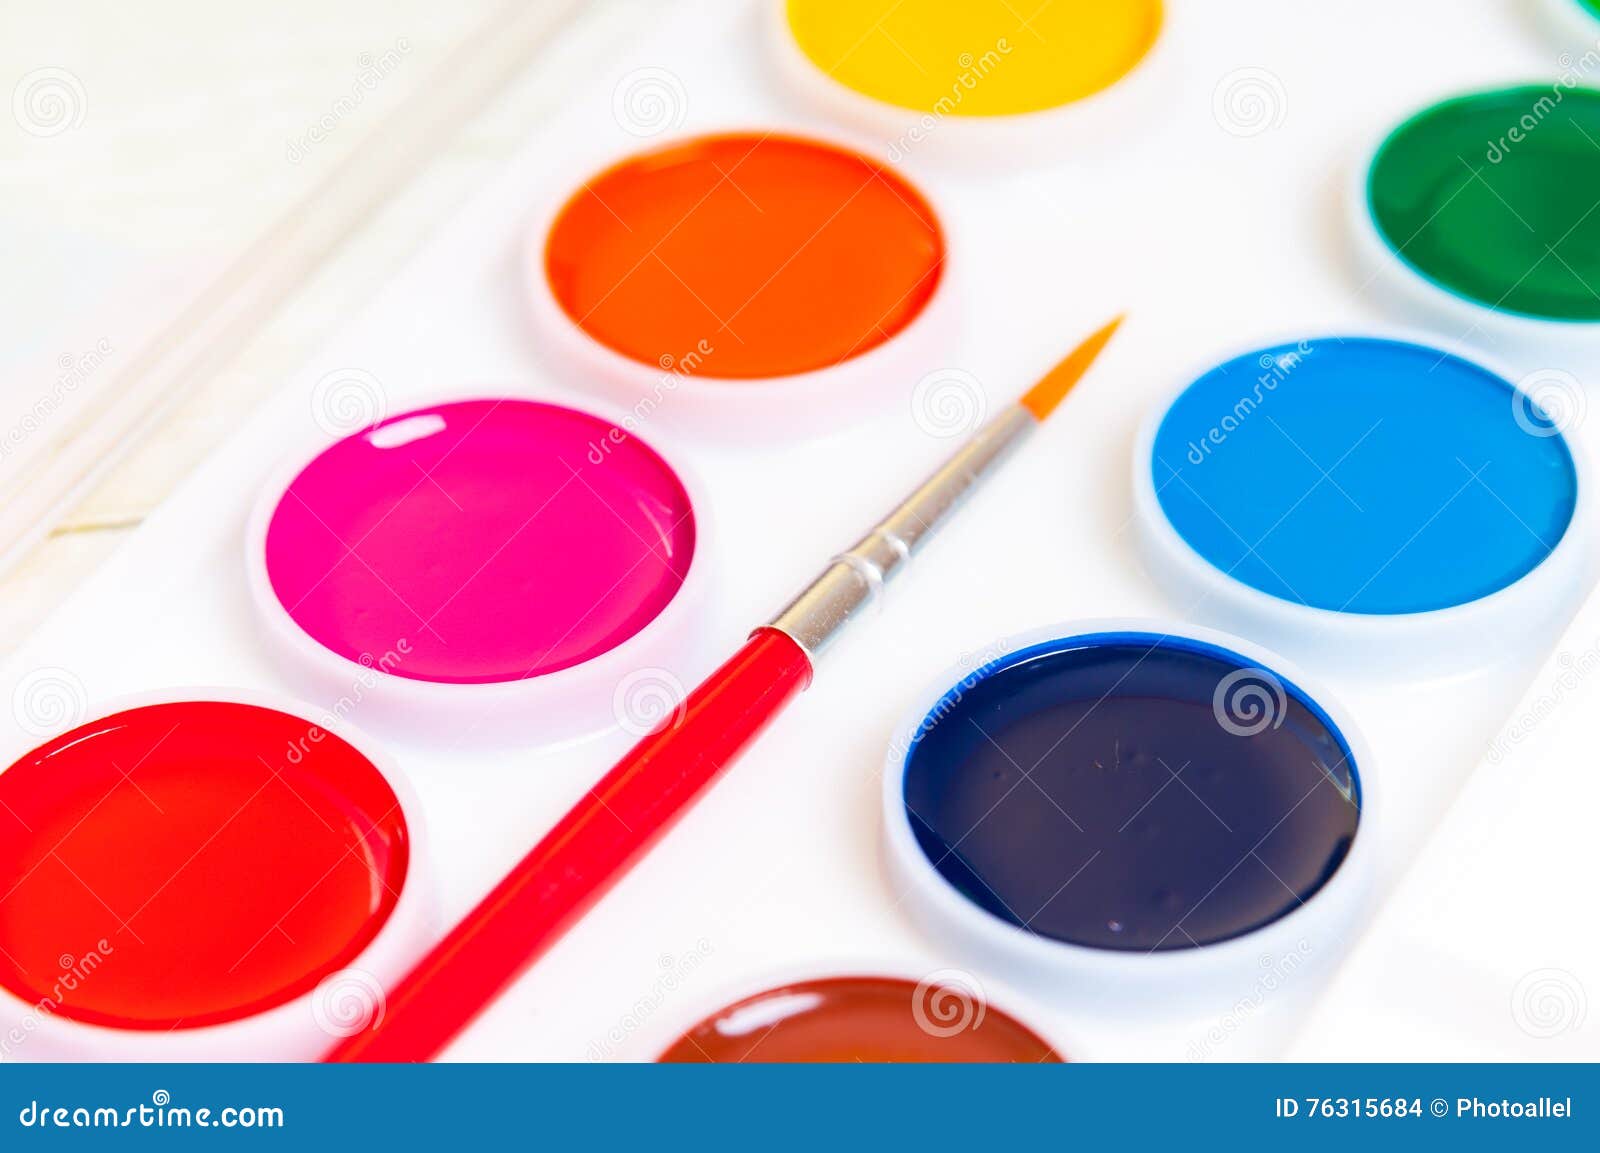 Watercolors and Brush on a White Background Stock Photo - Image of ...